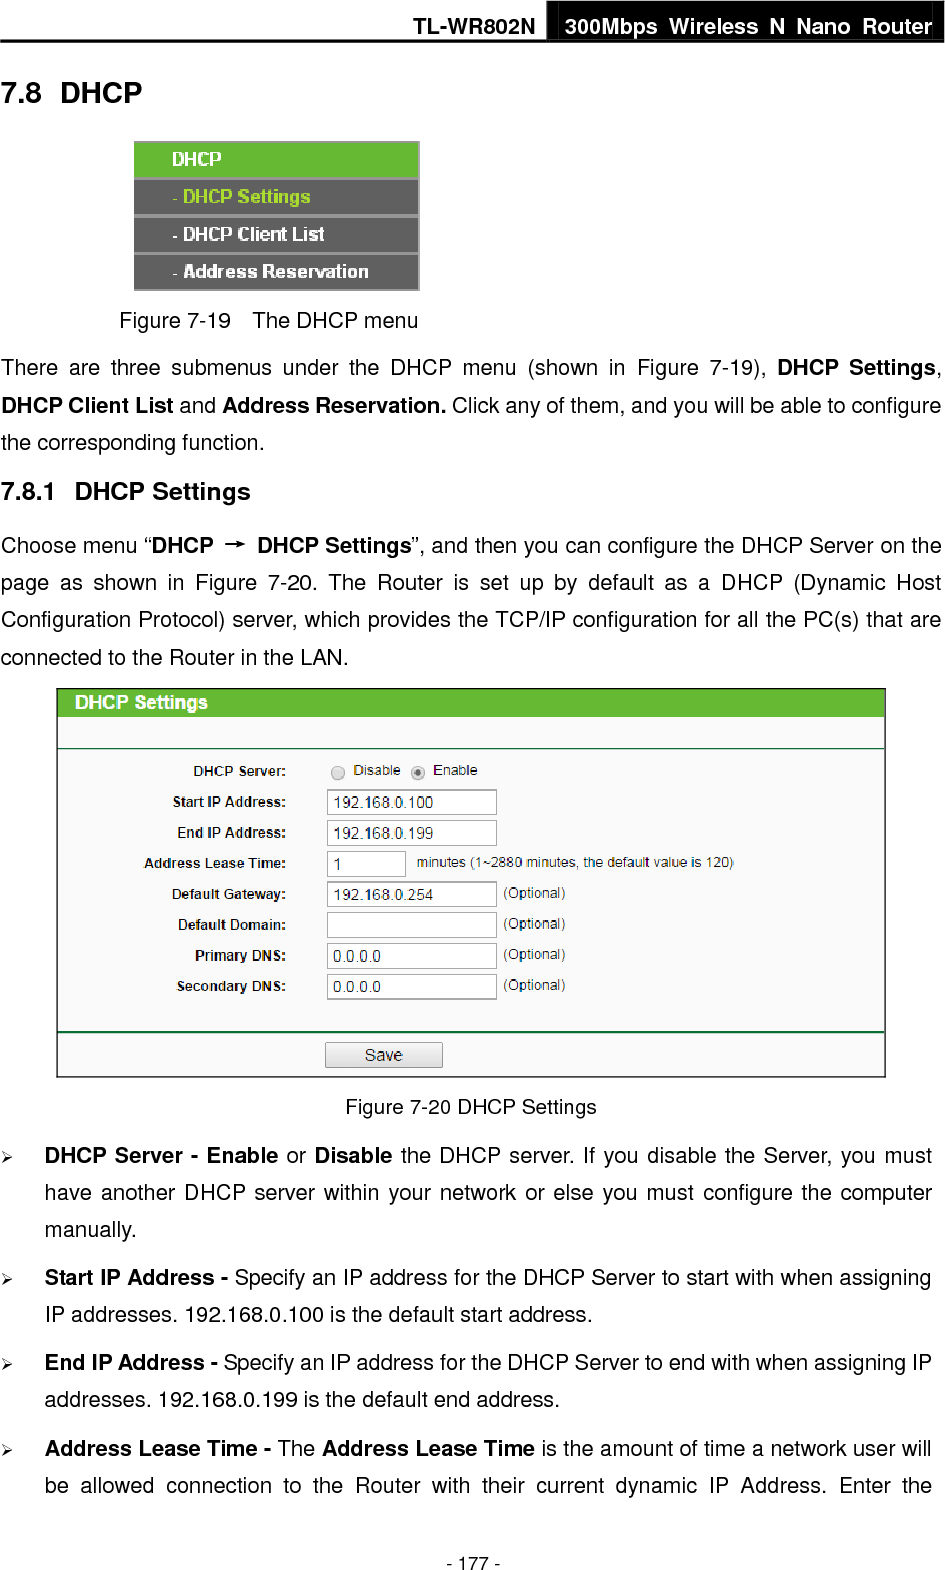 TL-WR802N 300Mbps  Wireless  N  Nano  Router  - 177 - 7.8  DHCP  Figure 7-19  The DHCP menu There  are  three  submenus  under  the  DHCP  menu  (shown  in  Figure  7-19),  DHCP  Settings, DHCP Client List and Address Reservation. Click any of them, and you will be able to configure the corresponding function. 7.8.1  DHCP Settings Choose menu “DHCP  →  DHCP Settings”, and then you can configure the DHCP Server on the page  as  shown  in  Figure  7-20.  The  Router  is  set  up  by  default  as  a  DHCP  (Dynamic  Host Configuration Protocol) server, which provides the TCP/IP configuration for all the PC(s) that are connected to the Router in the LAN.    Figure 7-20 DHCP Settings  DHCP Server - Enable or Disable the DHCP server. If you disable the Server, you must have another DHCP server within your network or else you must configure the computer manually.  Start IP Address - Specify an IP address for the DHCP Server to start with when assigning IP addresses. 192.168.0.100 is the default start address.  End IP Address - Specify an IP address for the DHCP Server to end with when assigning IP addresses. 192.168.0.199 is the default end address.  Address Lease Time - The Address Lease Time is the amount of time a network user will be  allowed  connection  to  the  Router  with  their  current  dynamic  IP  Address.  Enter  the 